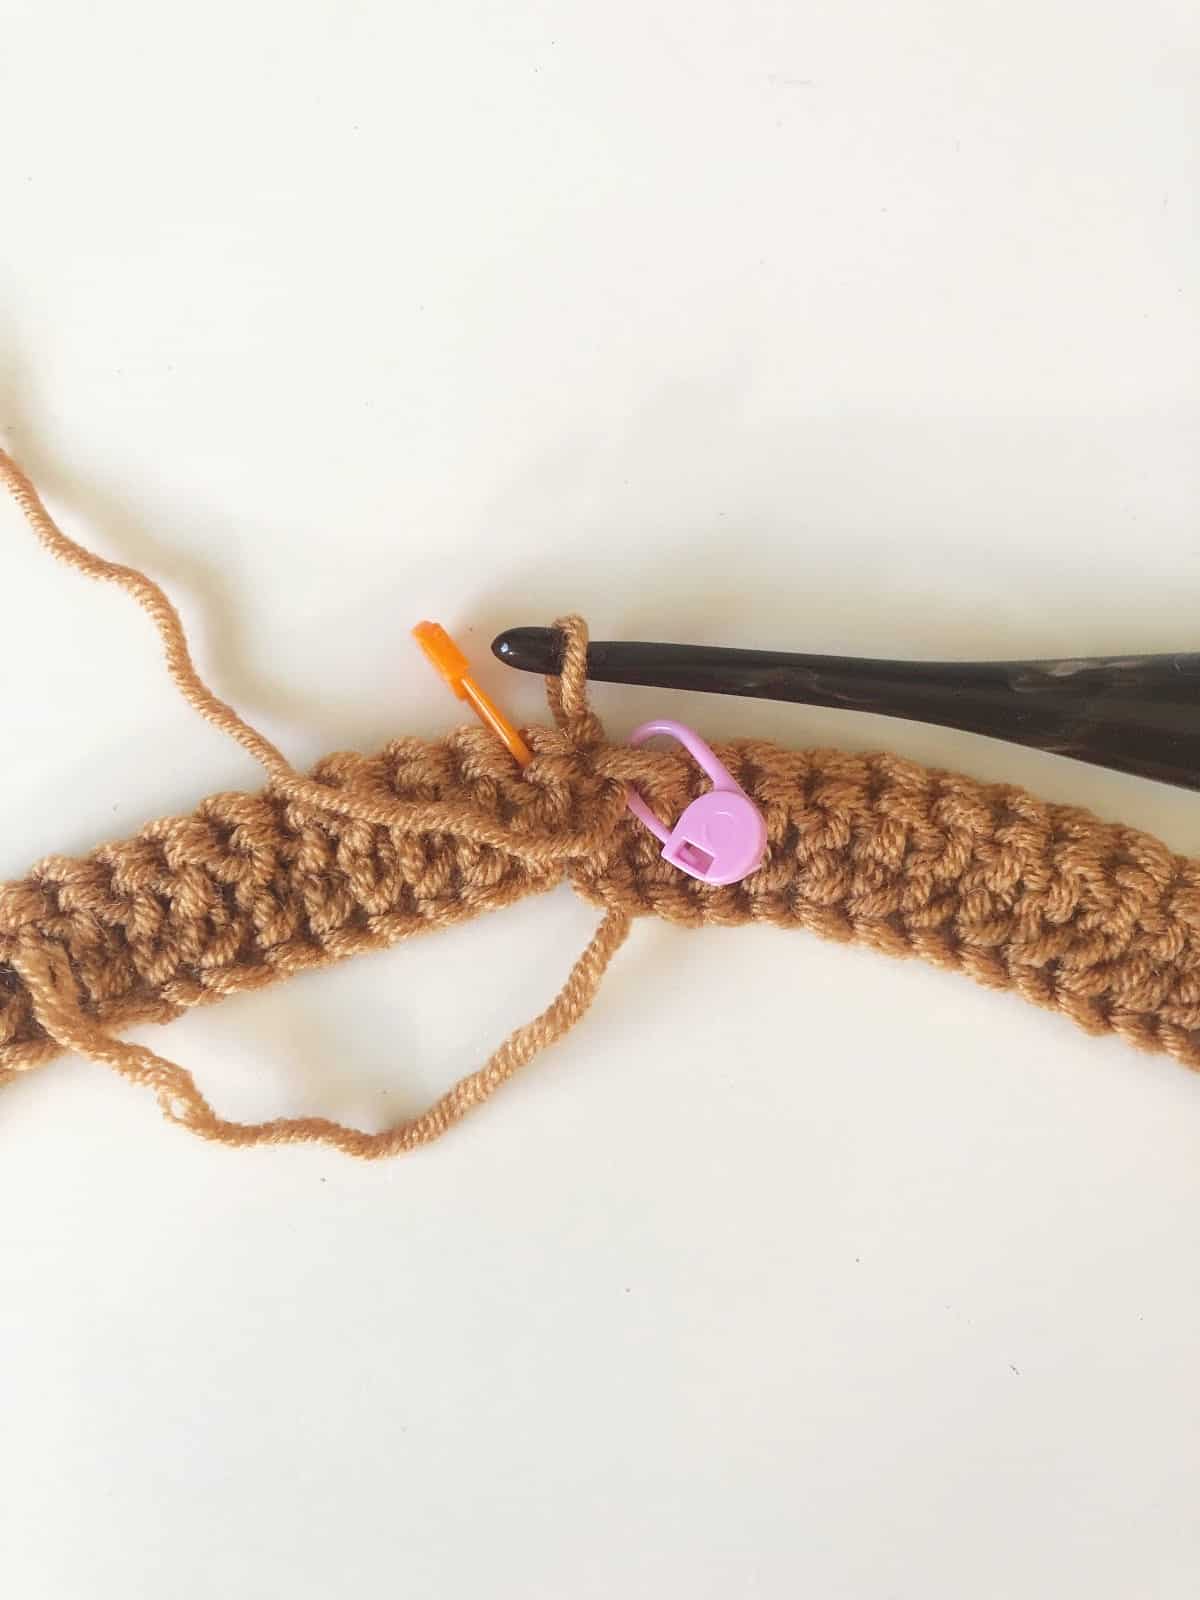 Crochet round joined and turned, stitch markers to indicate the first and last stitches.